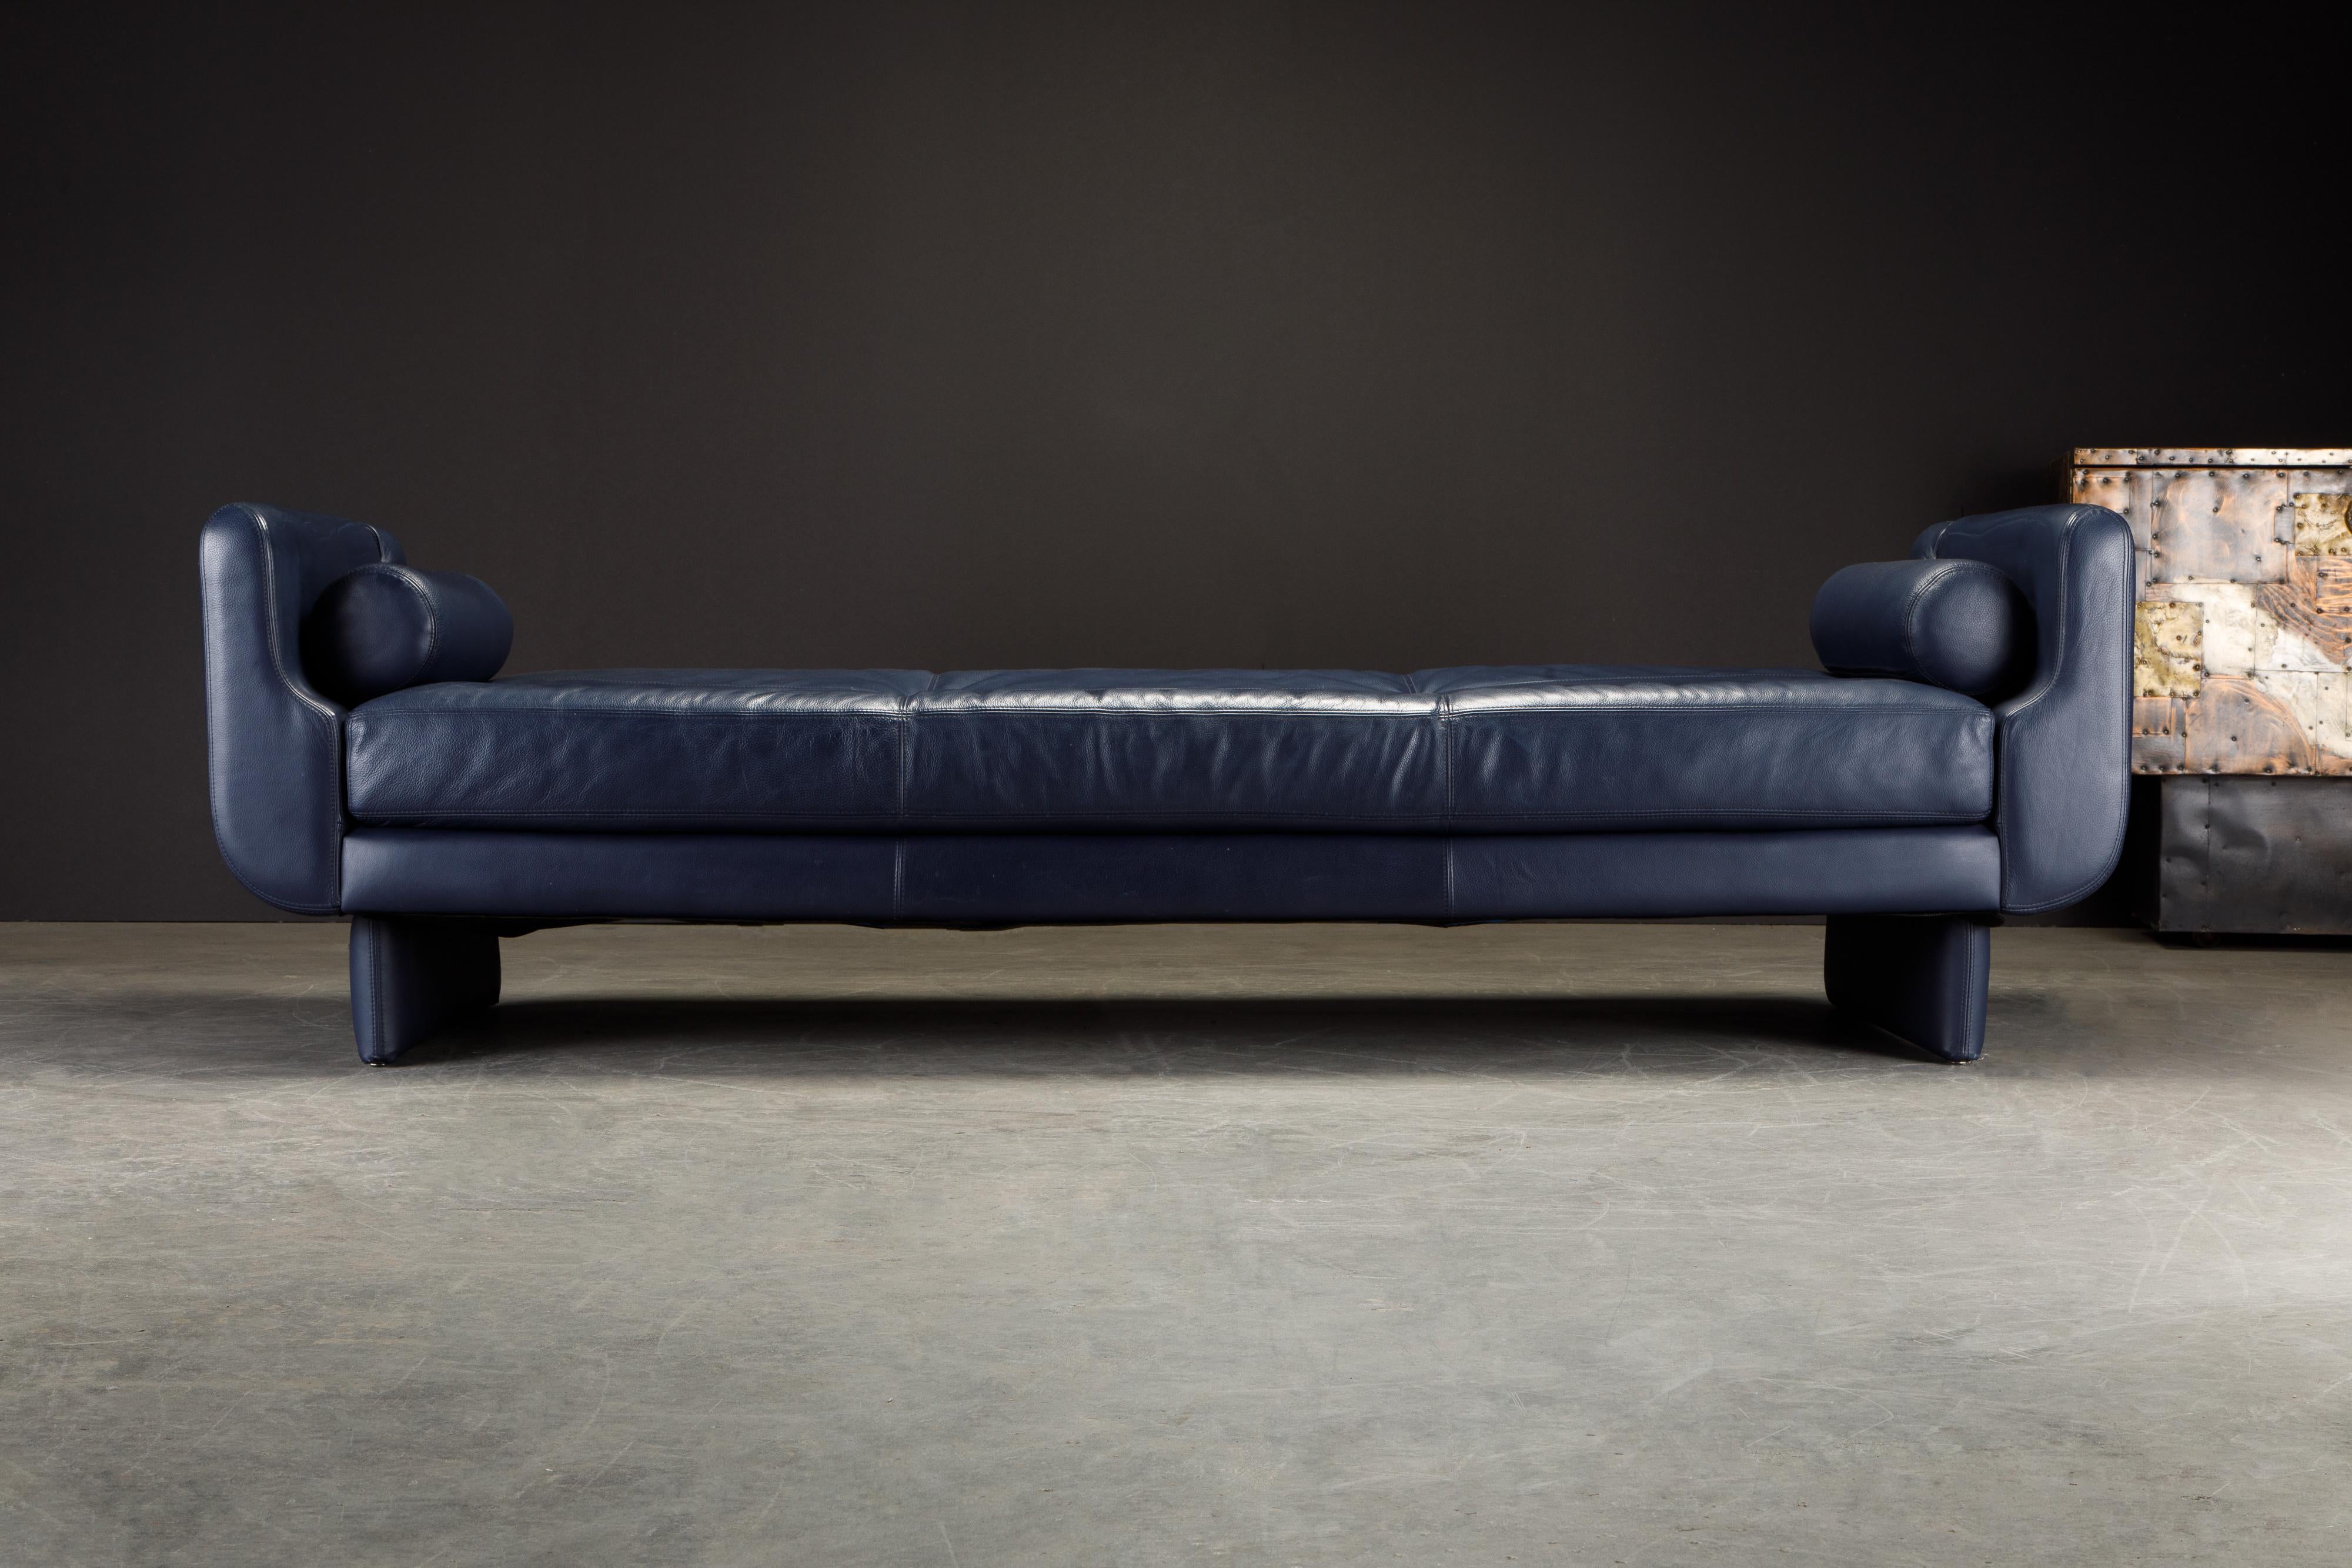 Post-Modern Vladimir Kagan for American Leather 'Matinee' Blue Leather Sofa Daybed, Signed